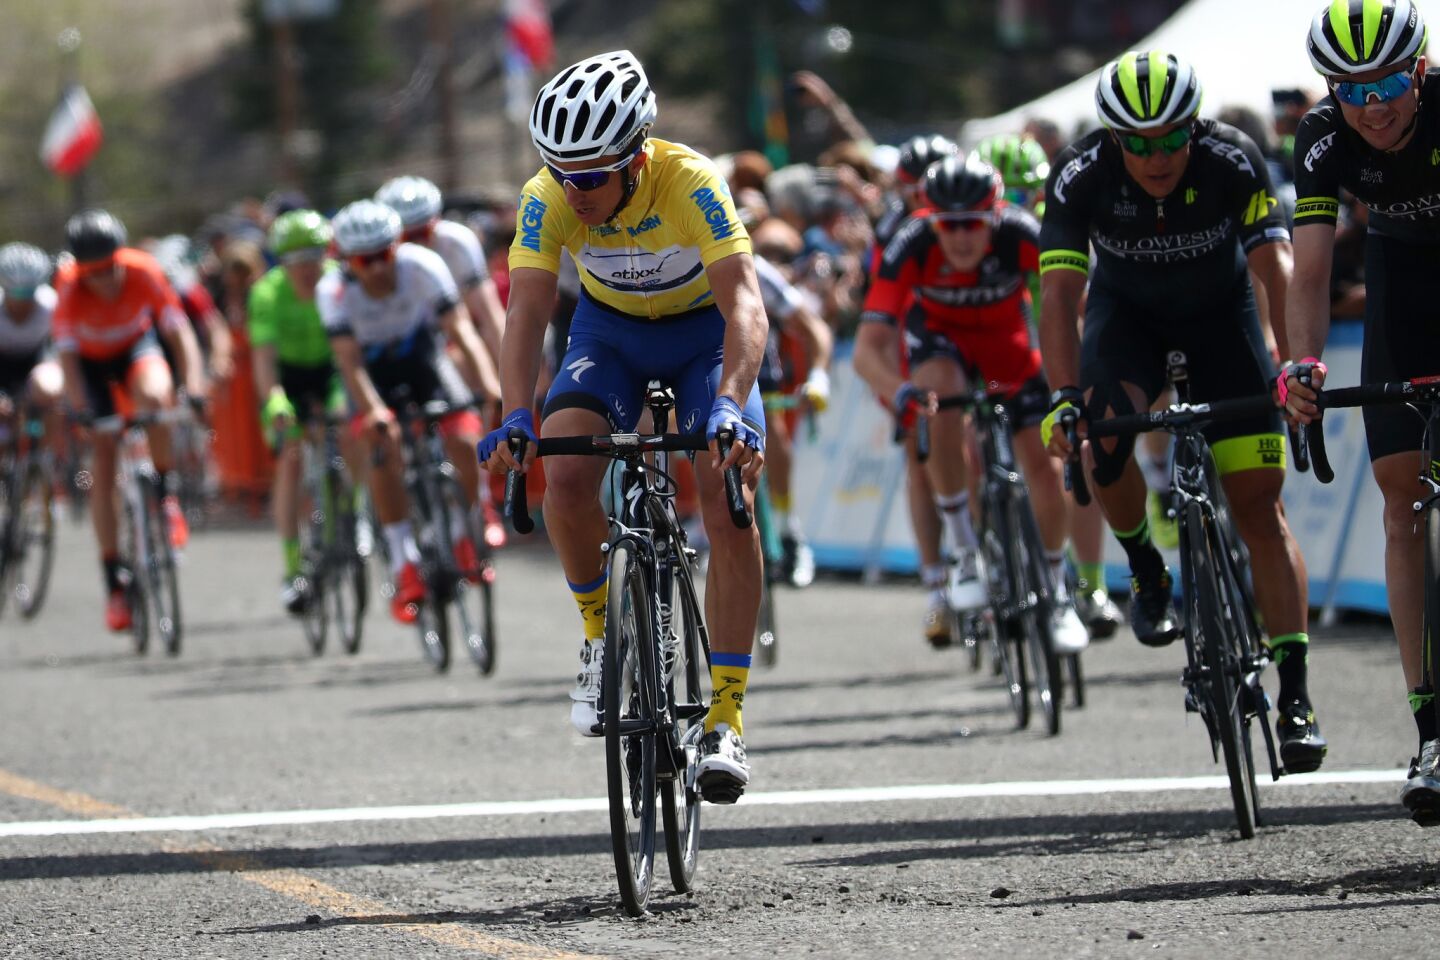 France's Julian Alaphilippe, the overall race leader, crosses the finish line during the fifth stage of the Amgen Tour of California on May 19.